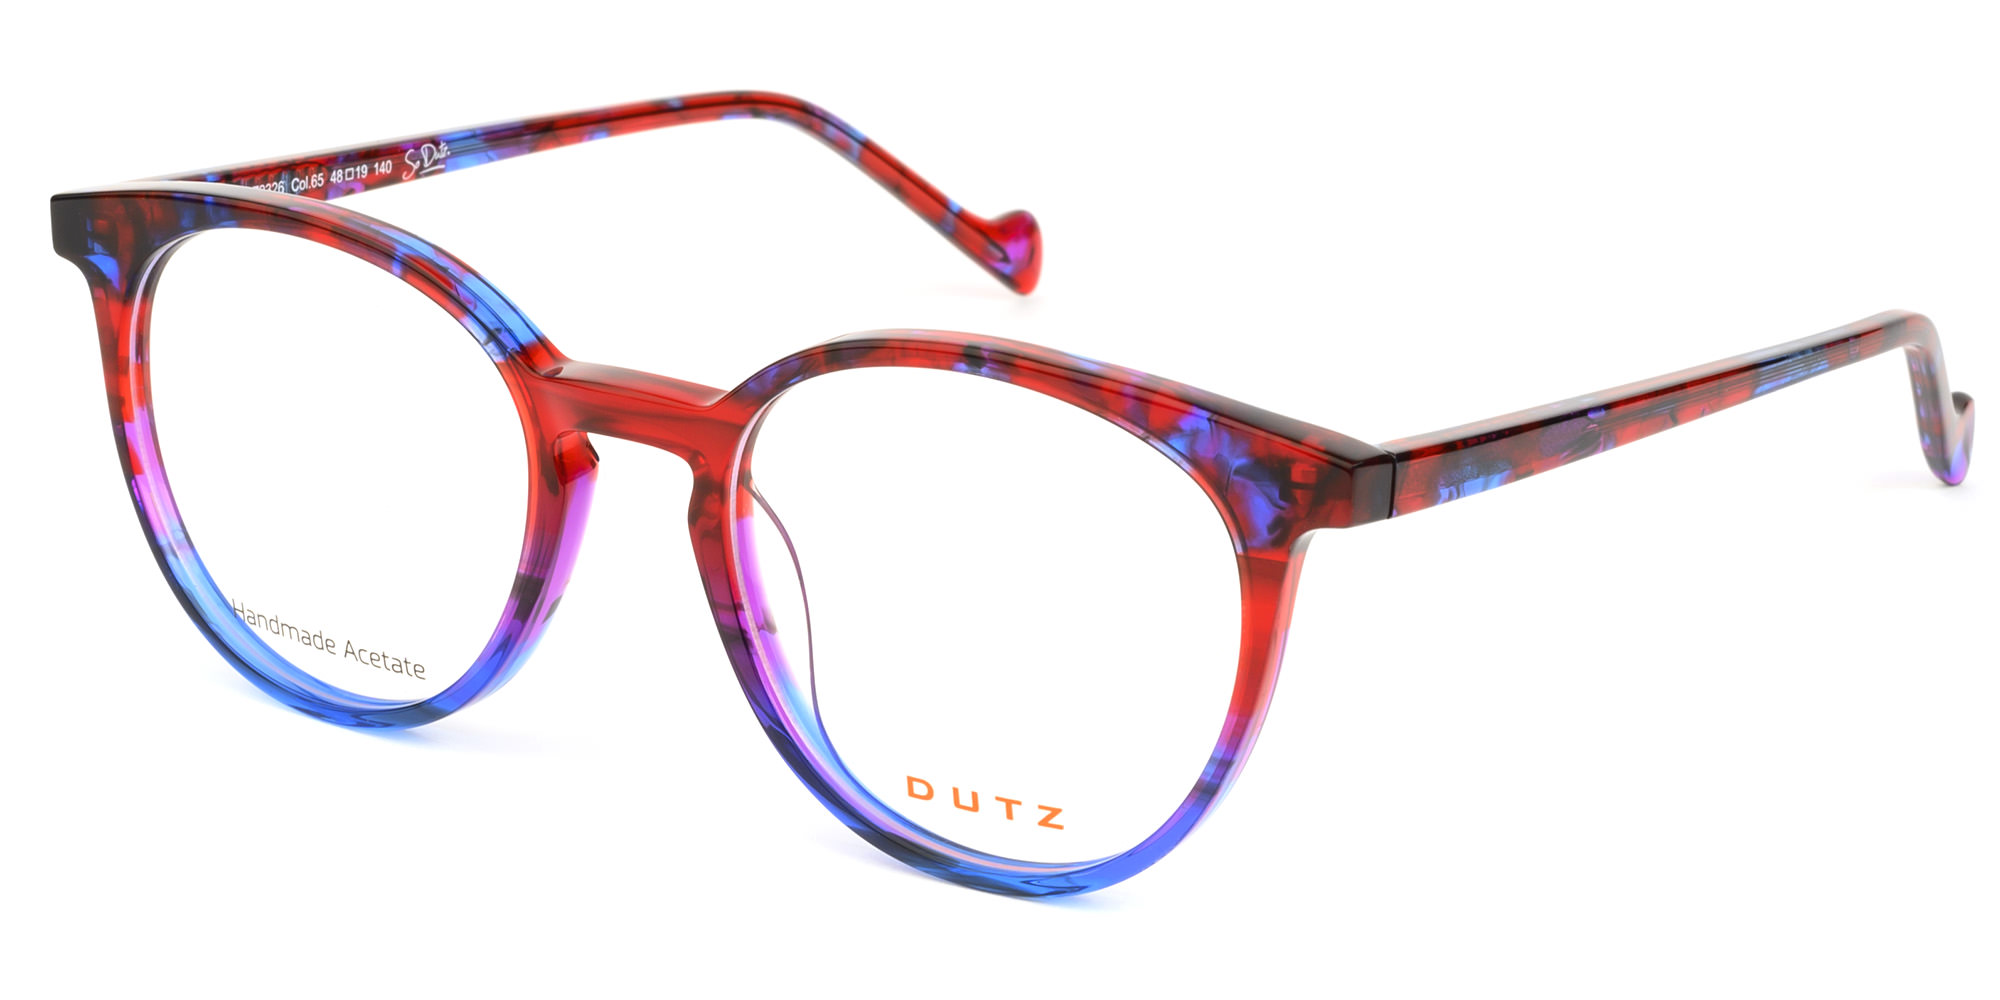 Ladies, red-blue based multi-colored, acetate frame and temples